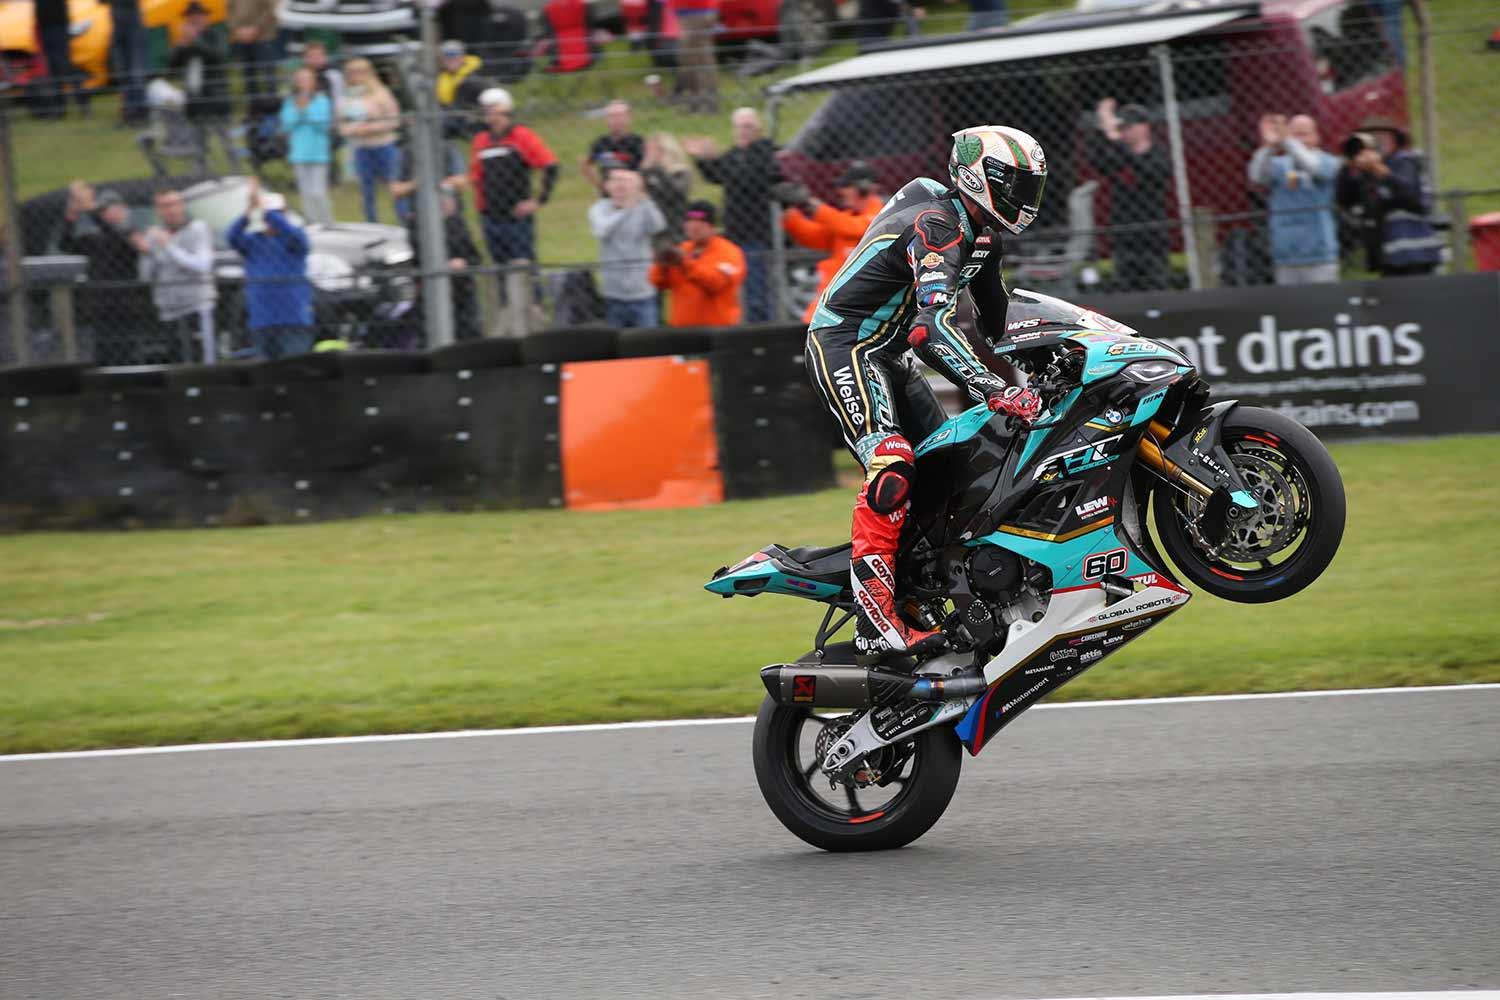 bsb-brands-hatch-peter-hickman-secures-first-win-of-the-season-in-race-two